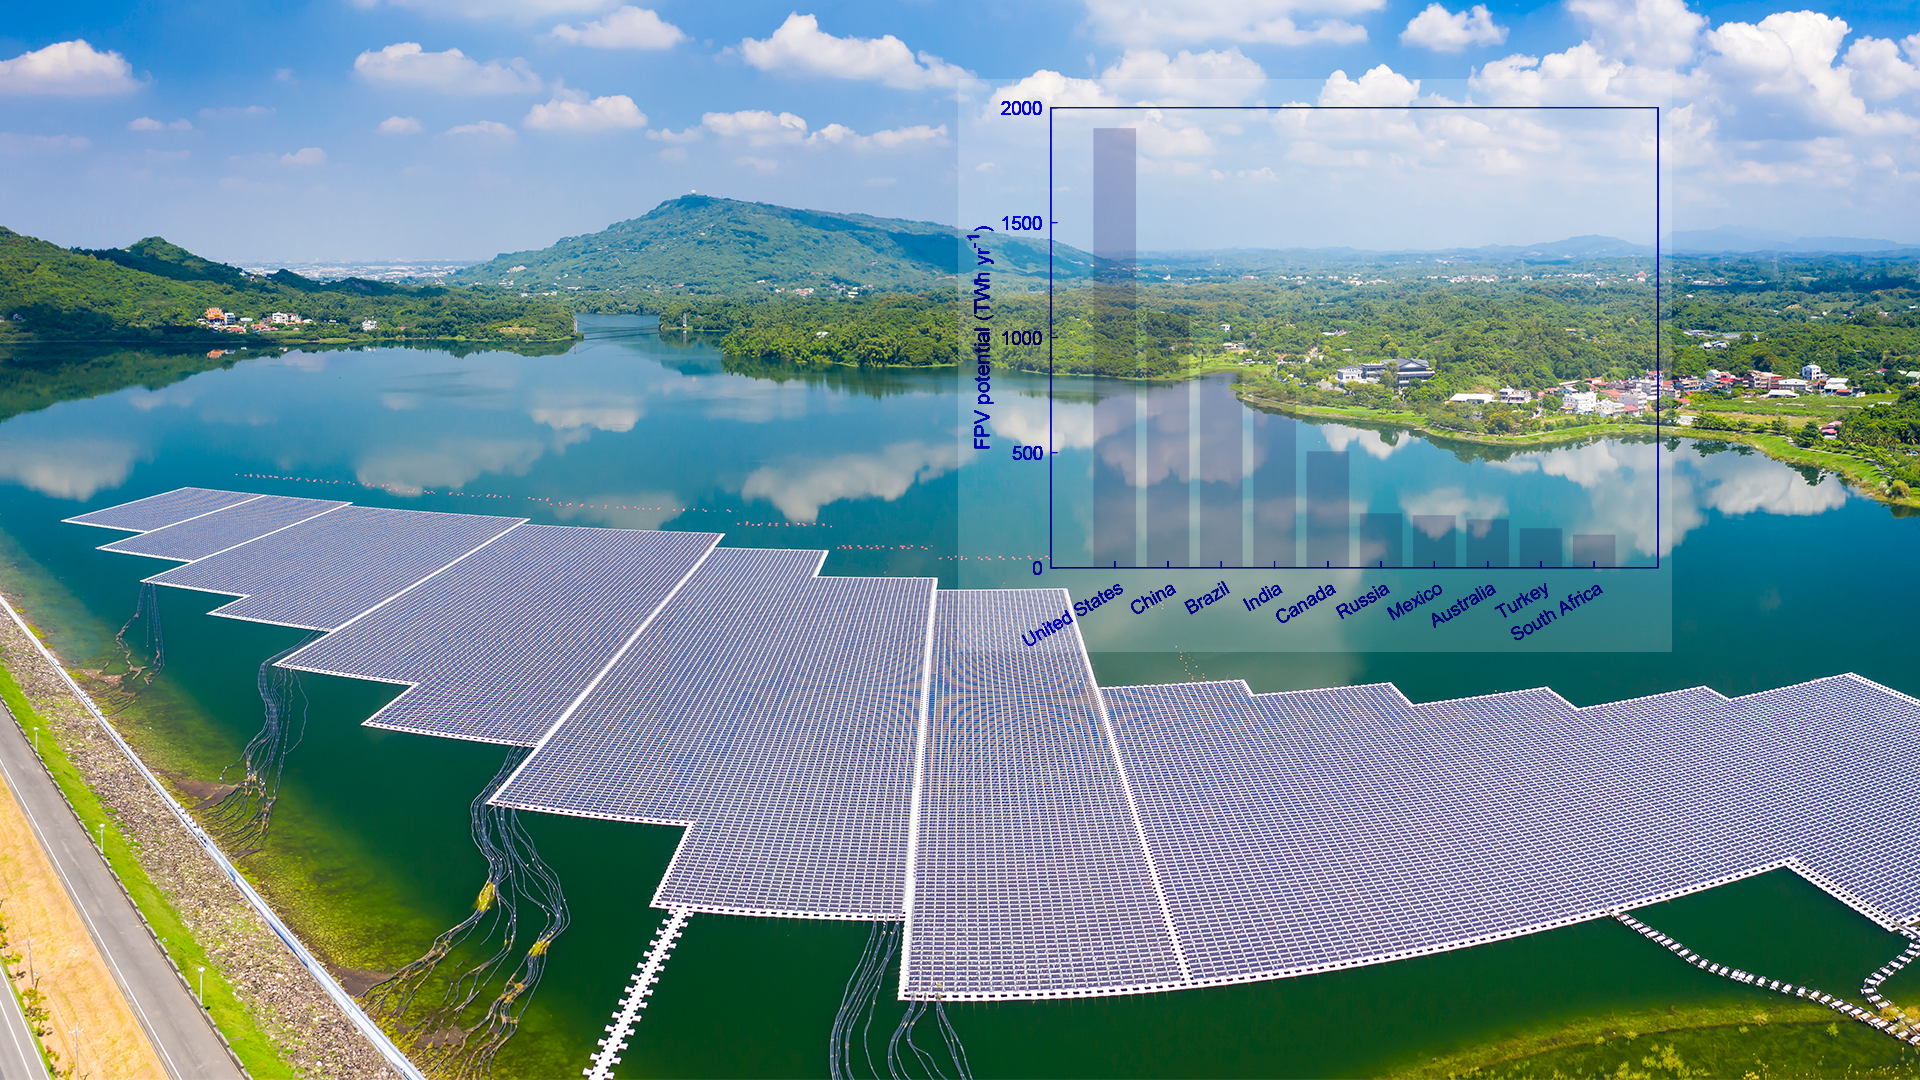 Floating solar photovoltaic systems on global reservoirs hold great potential for enormous energy production and water savings